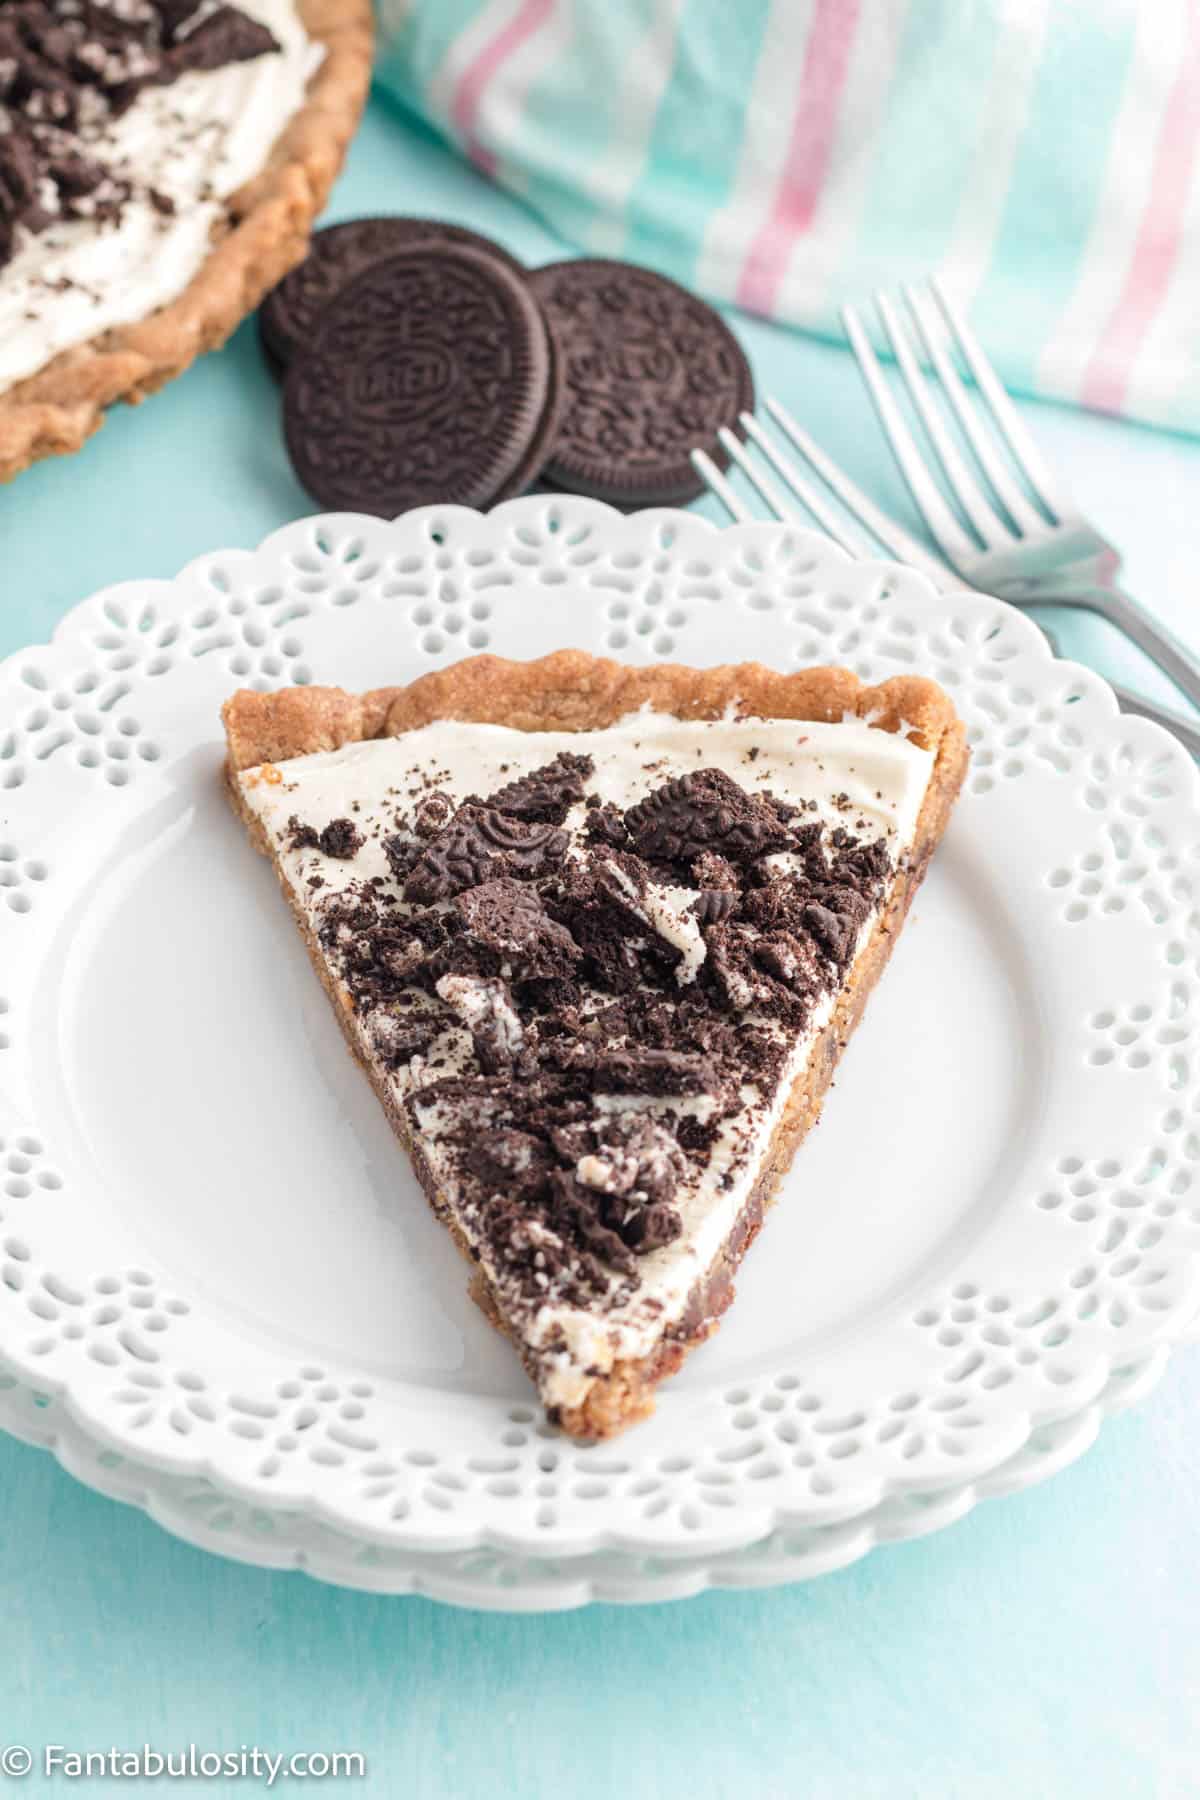 A slice of Oreo pizza rests on a pretty white plate and the rest of the pizza, a few Oreo cookies and forks are visible in the background